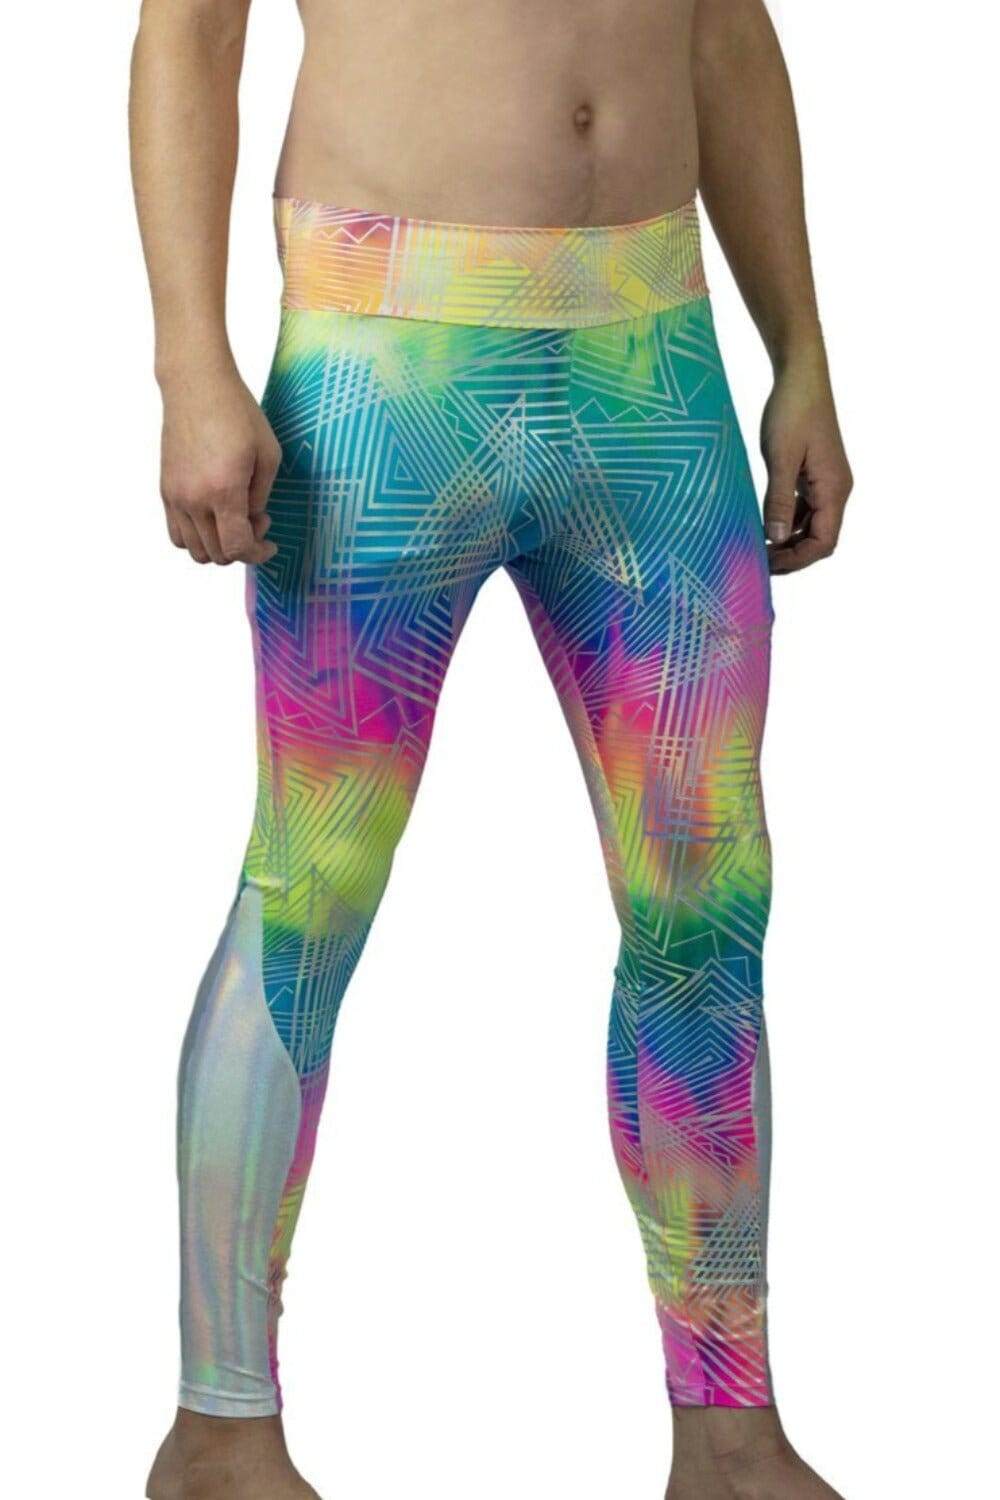 mens bright colors and Holographic silver triangle print festival leggings spandex tights with hidden pockets by Love Khaos